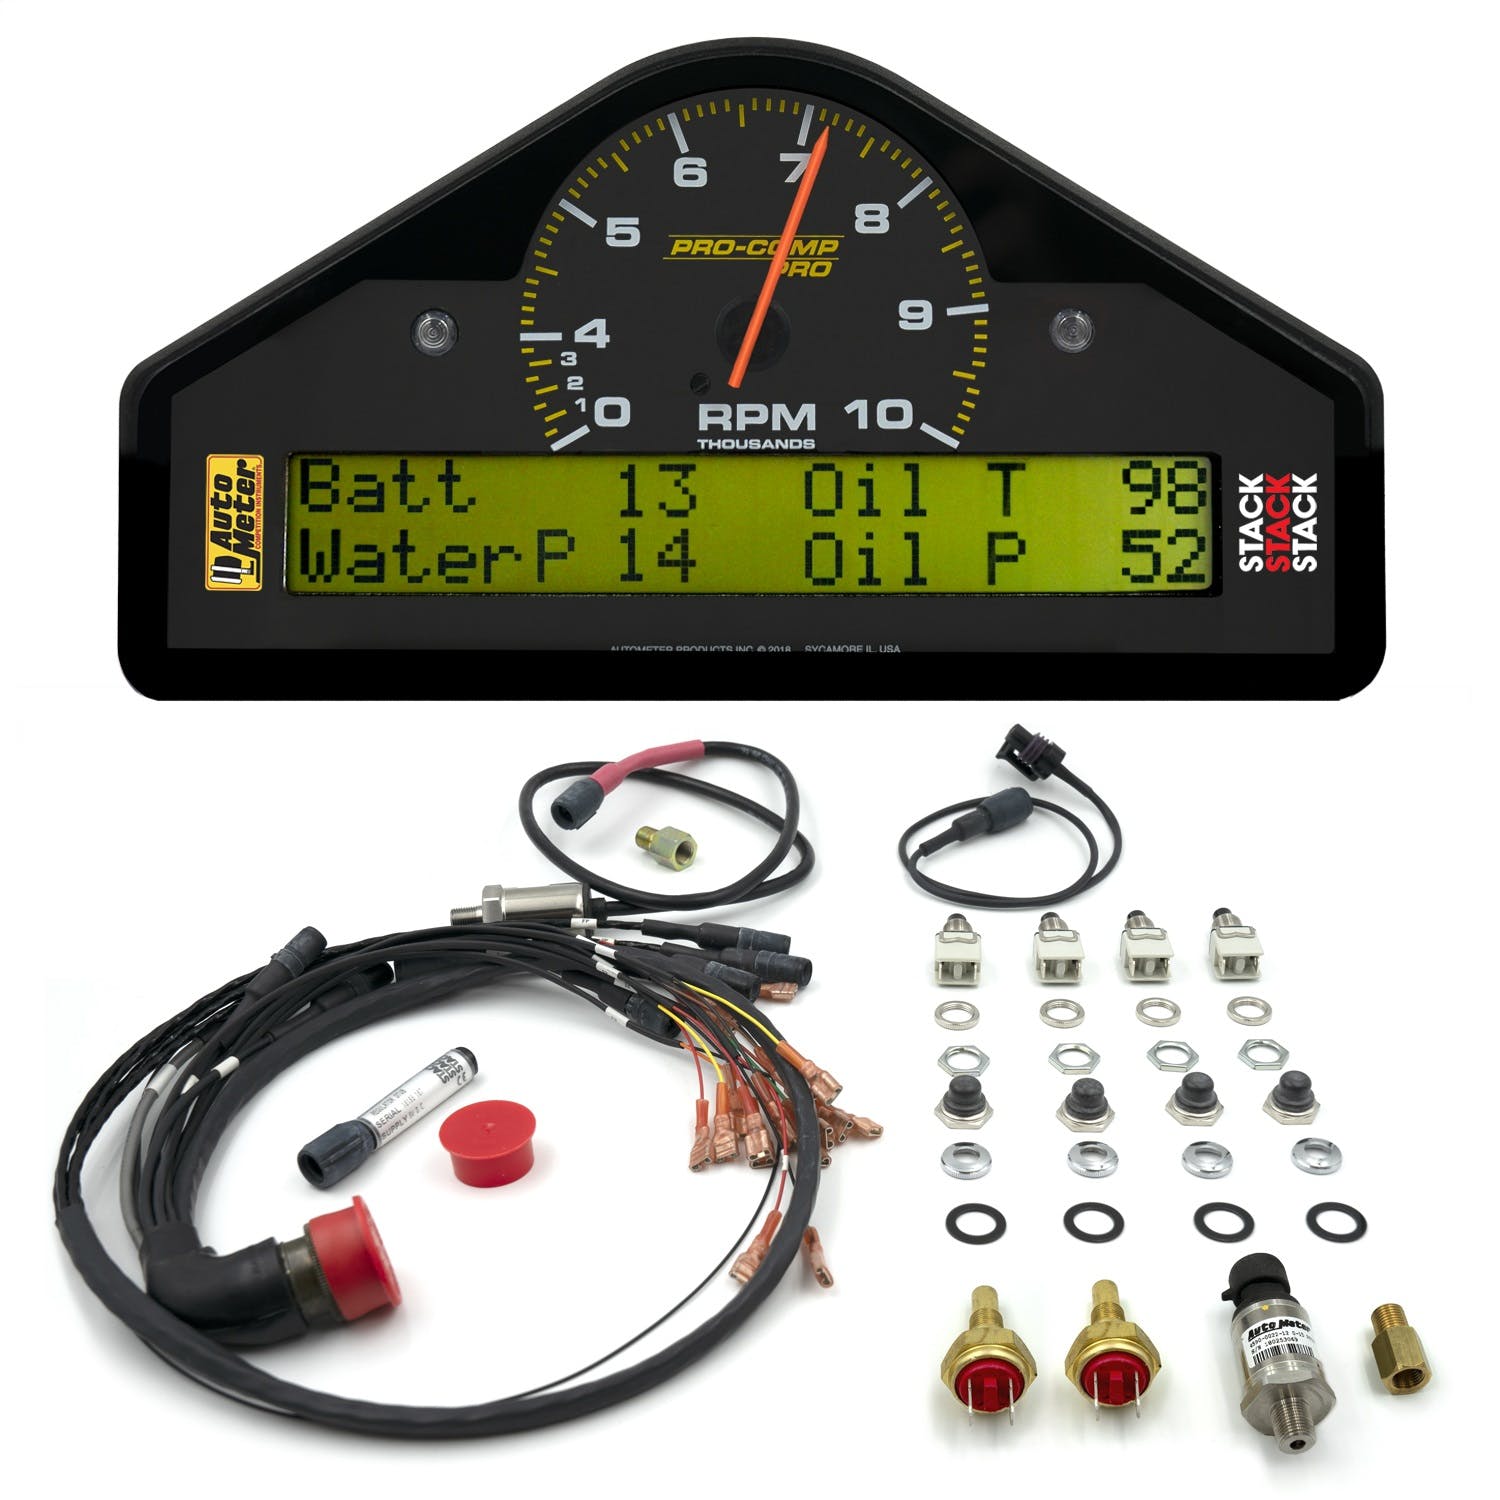 AutoMeter Products 6014 Race Dash Display Pro Comp